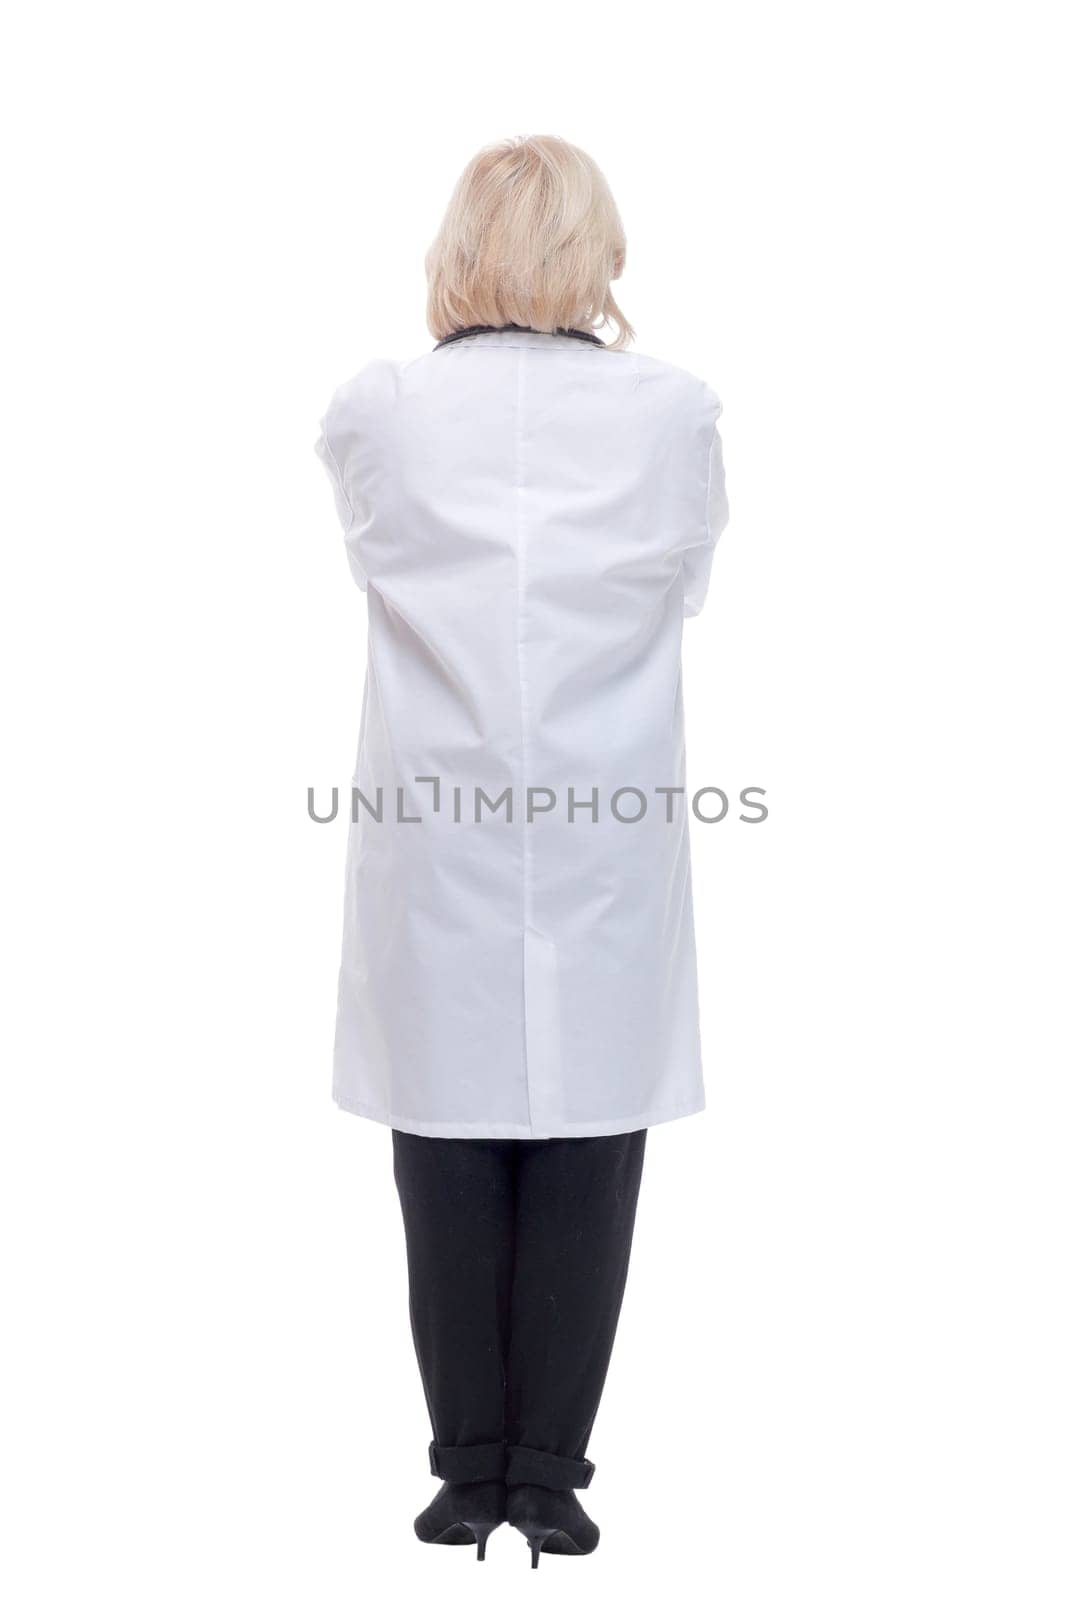 A health care worker standing isolated over white background by asdf